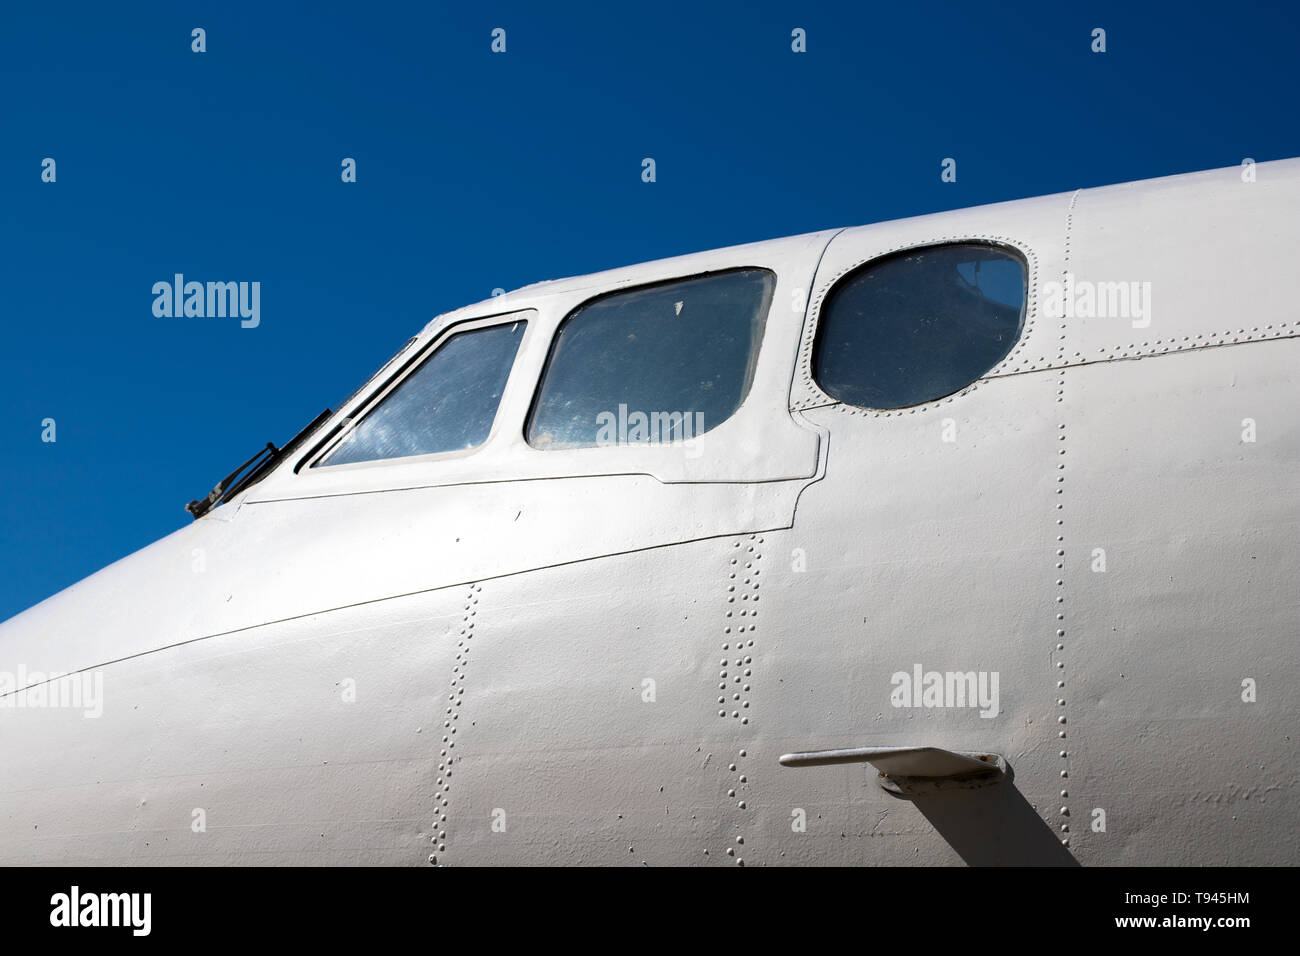 Fuselage cockpit. Part of the aircraft. The nose of the aircraft against the blue sky. Stock Photo